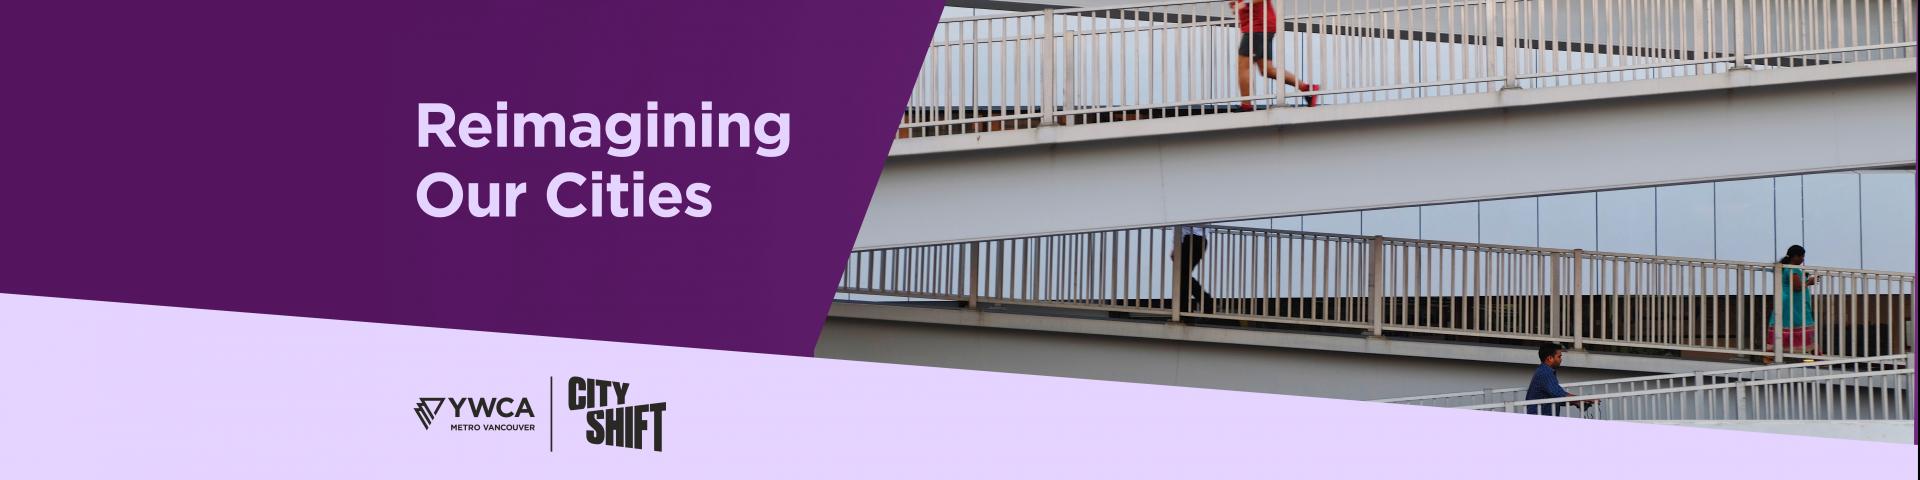 A YWCA City Shift Series Promotional Page Banner. Graphic shows a purple background, with a light diagonal purple banner on the bottom and an image of several ramps with pedestrians on the right. Text on graphic says "Reimagining Our Cities".